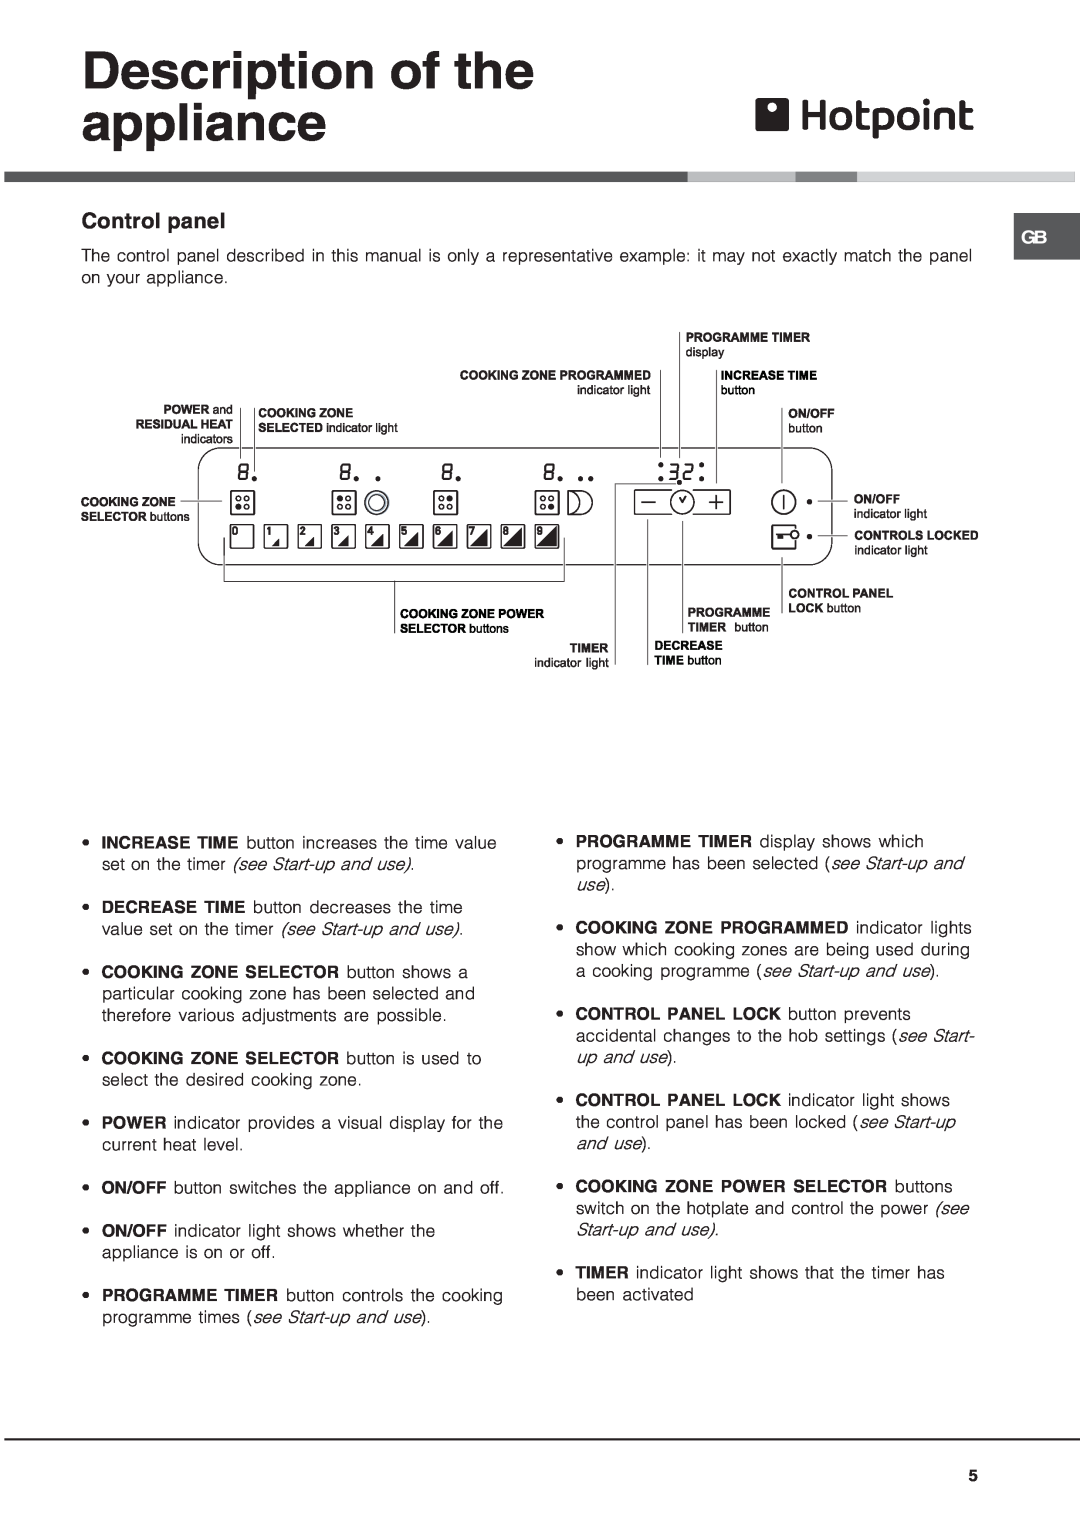 Hotpoint CRO 642 D B, CRO 742 DO B operating instructions Description of the appliance, Control panel 